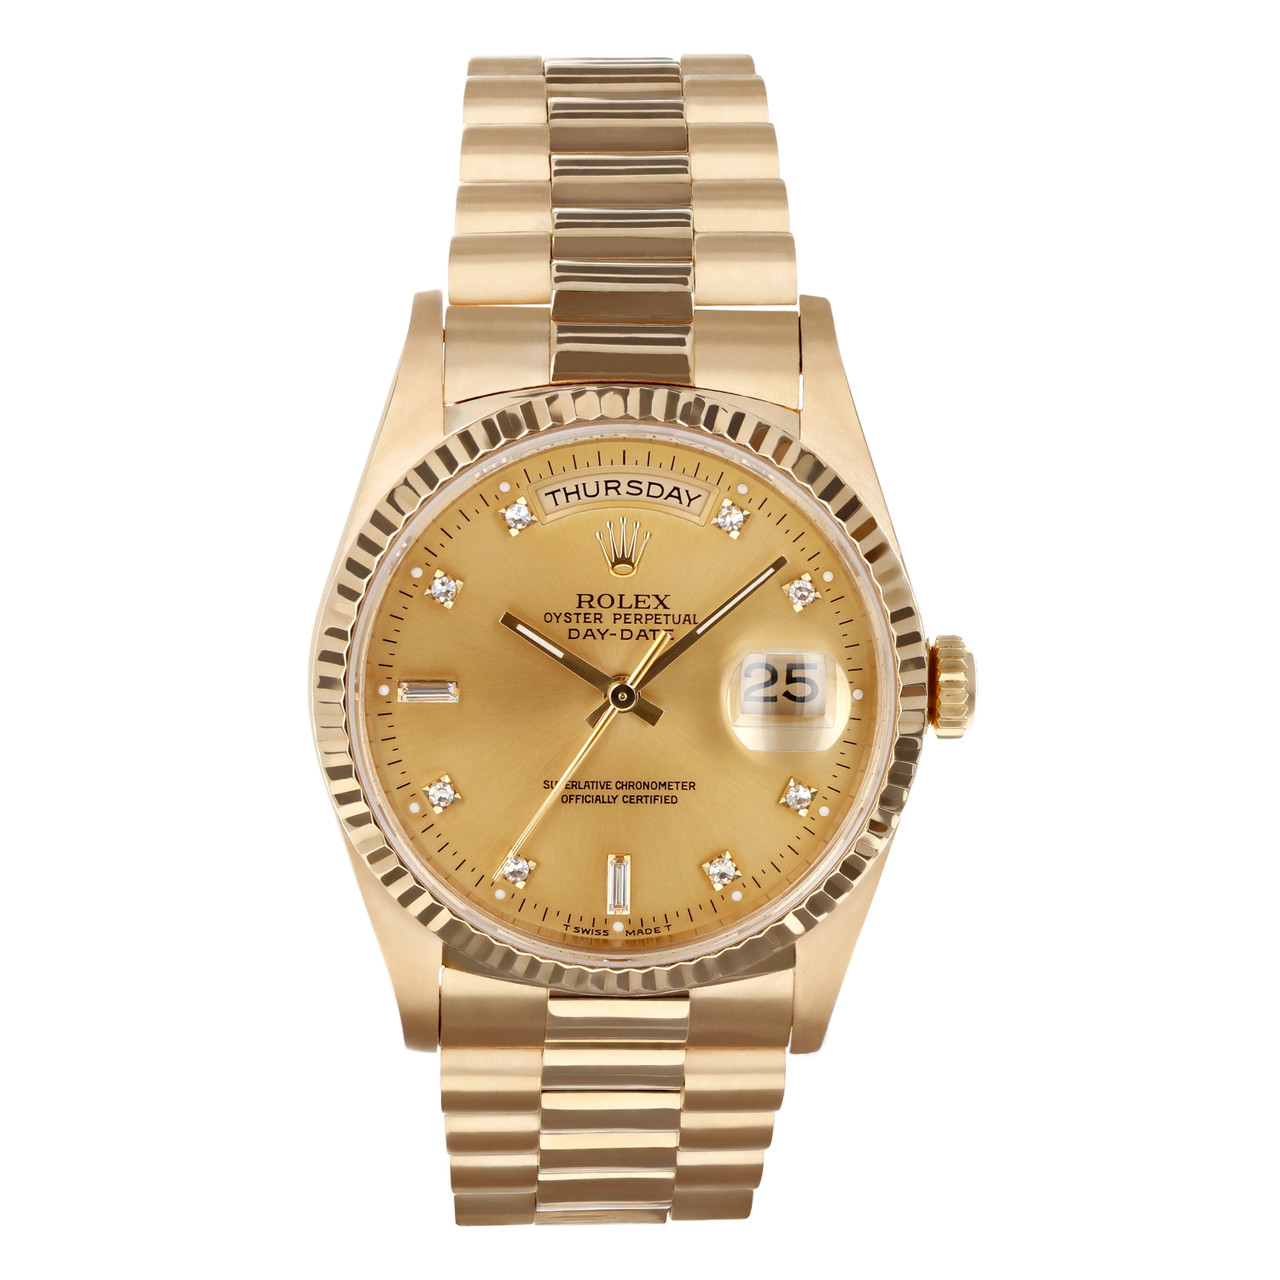 Rolex Day-Date President 18K Yellow Gold BUCKLEY DIAL 36mm, 52% OFF